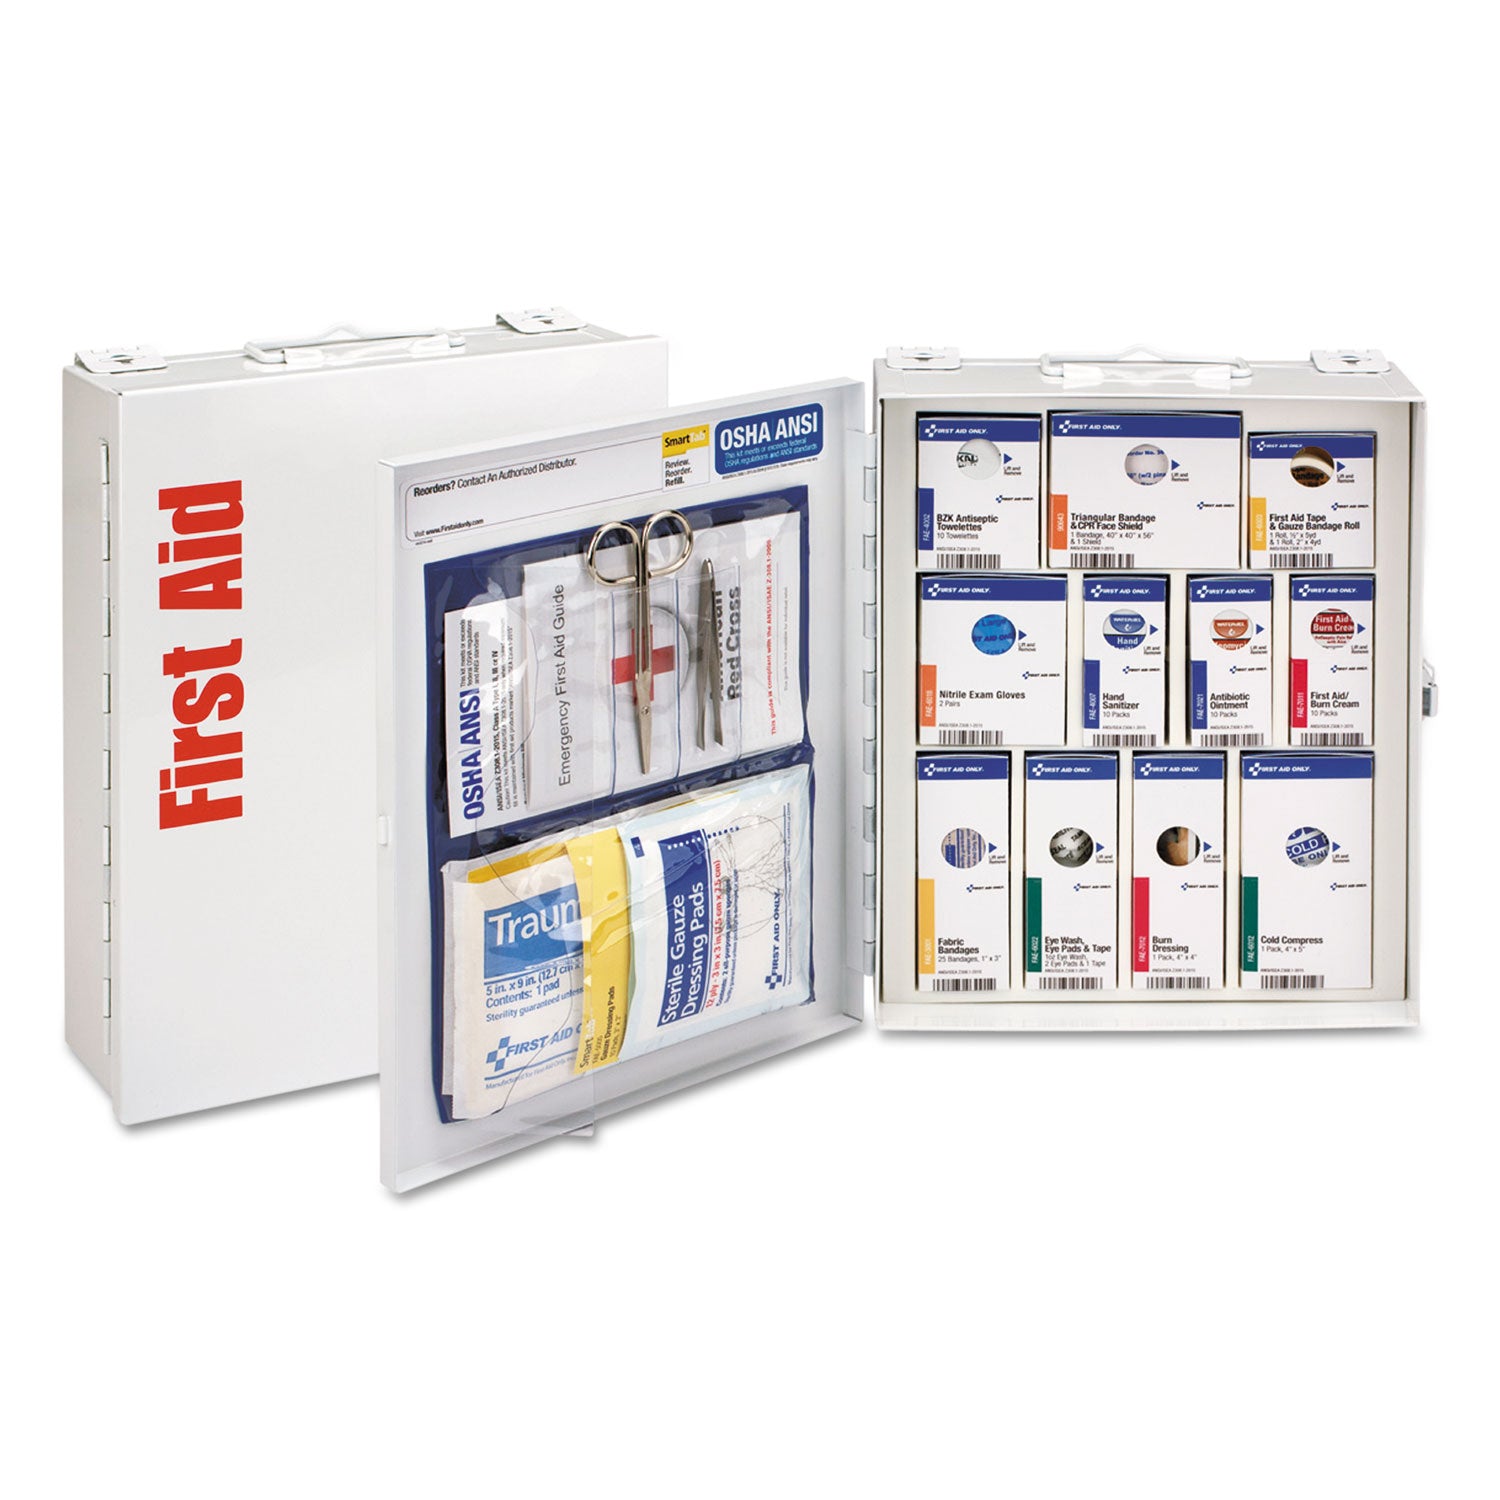 ansi-2015-smartcompliance-general-business-first-aid-station-class-a-no-meds-25-people-94-pieces-metal-case_fao90578021 - 1